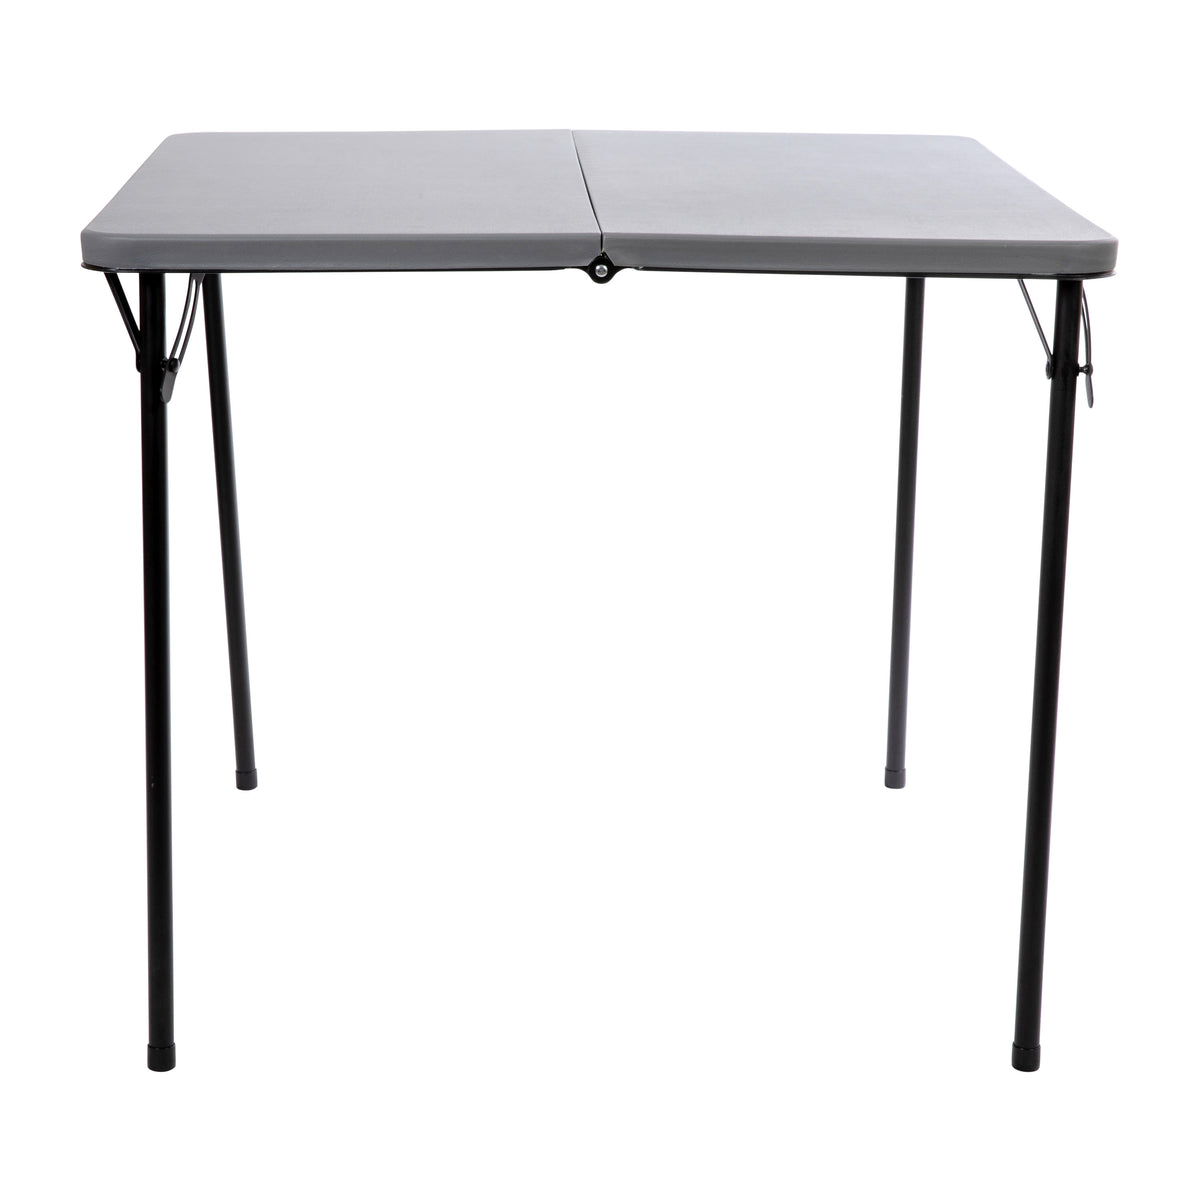 Gray |#| 2.83-Foot Square Bi-Fold Gray Plastic Folding Table with Carrying Handle